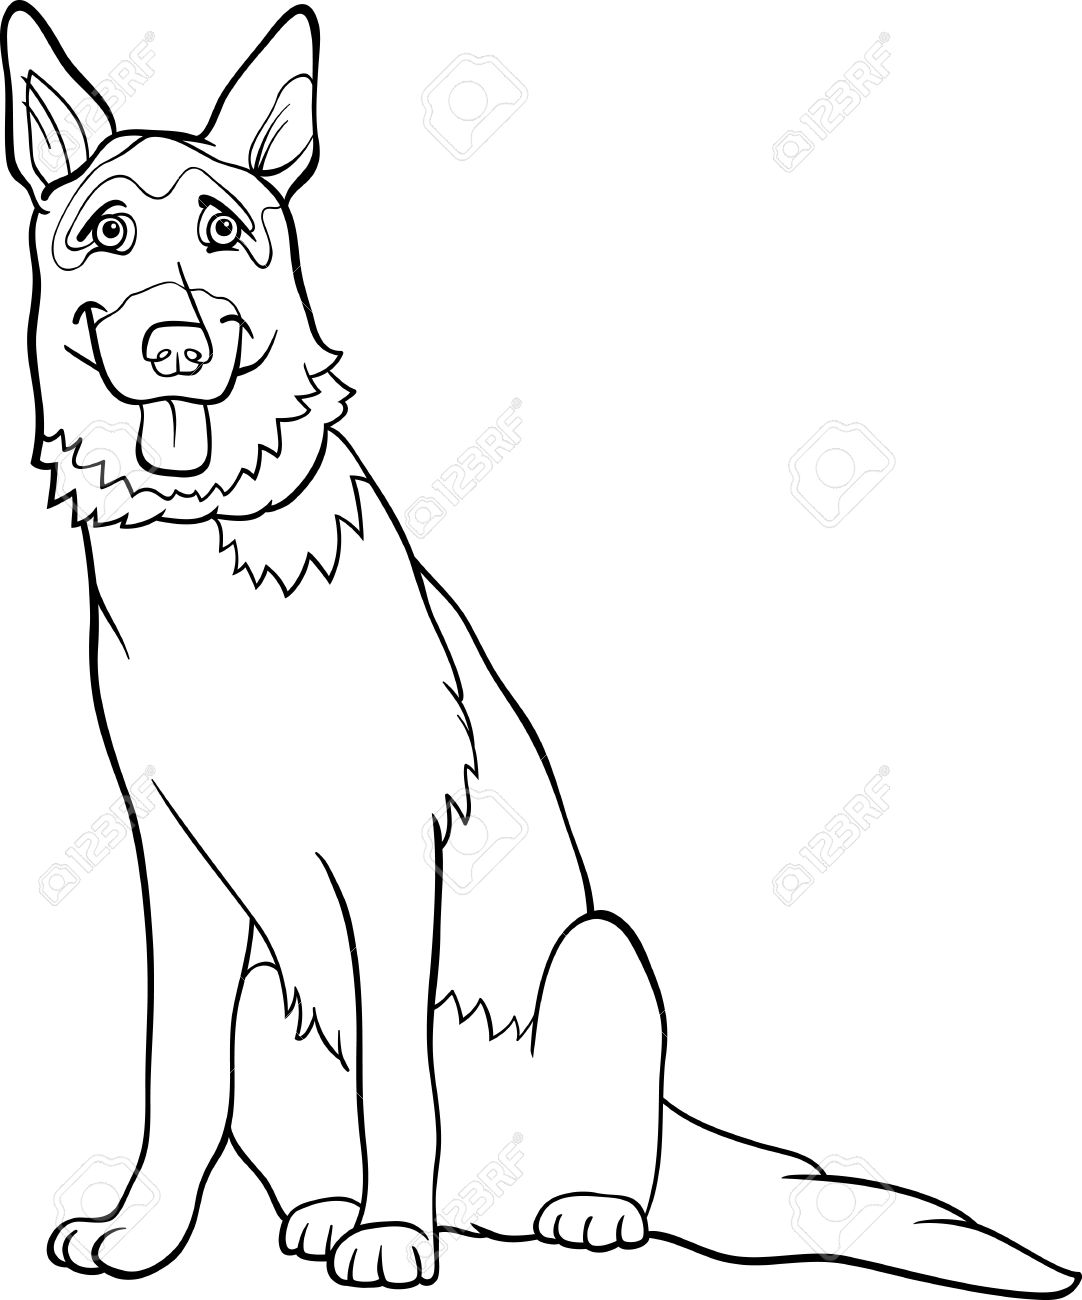 german shepherd pictures to print german shepherd coloring pages to download and print for free german shepherd print pictures to 